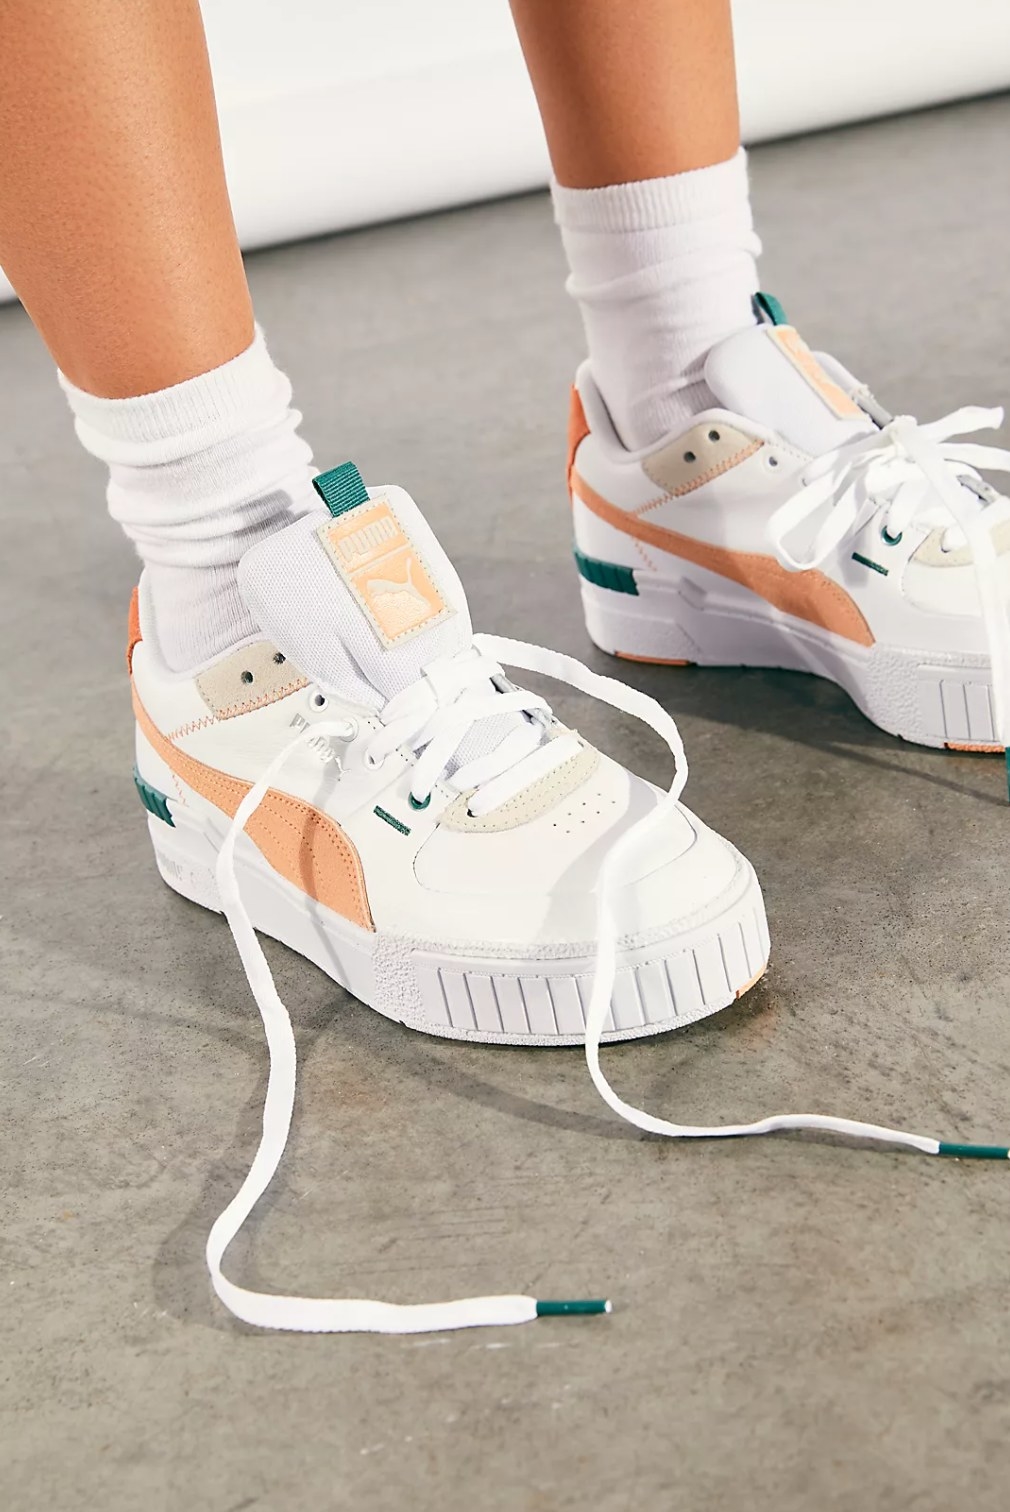 model&#x27;s legs wearing the puma sneakers in white with light orange and green accents and ankle high white socks